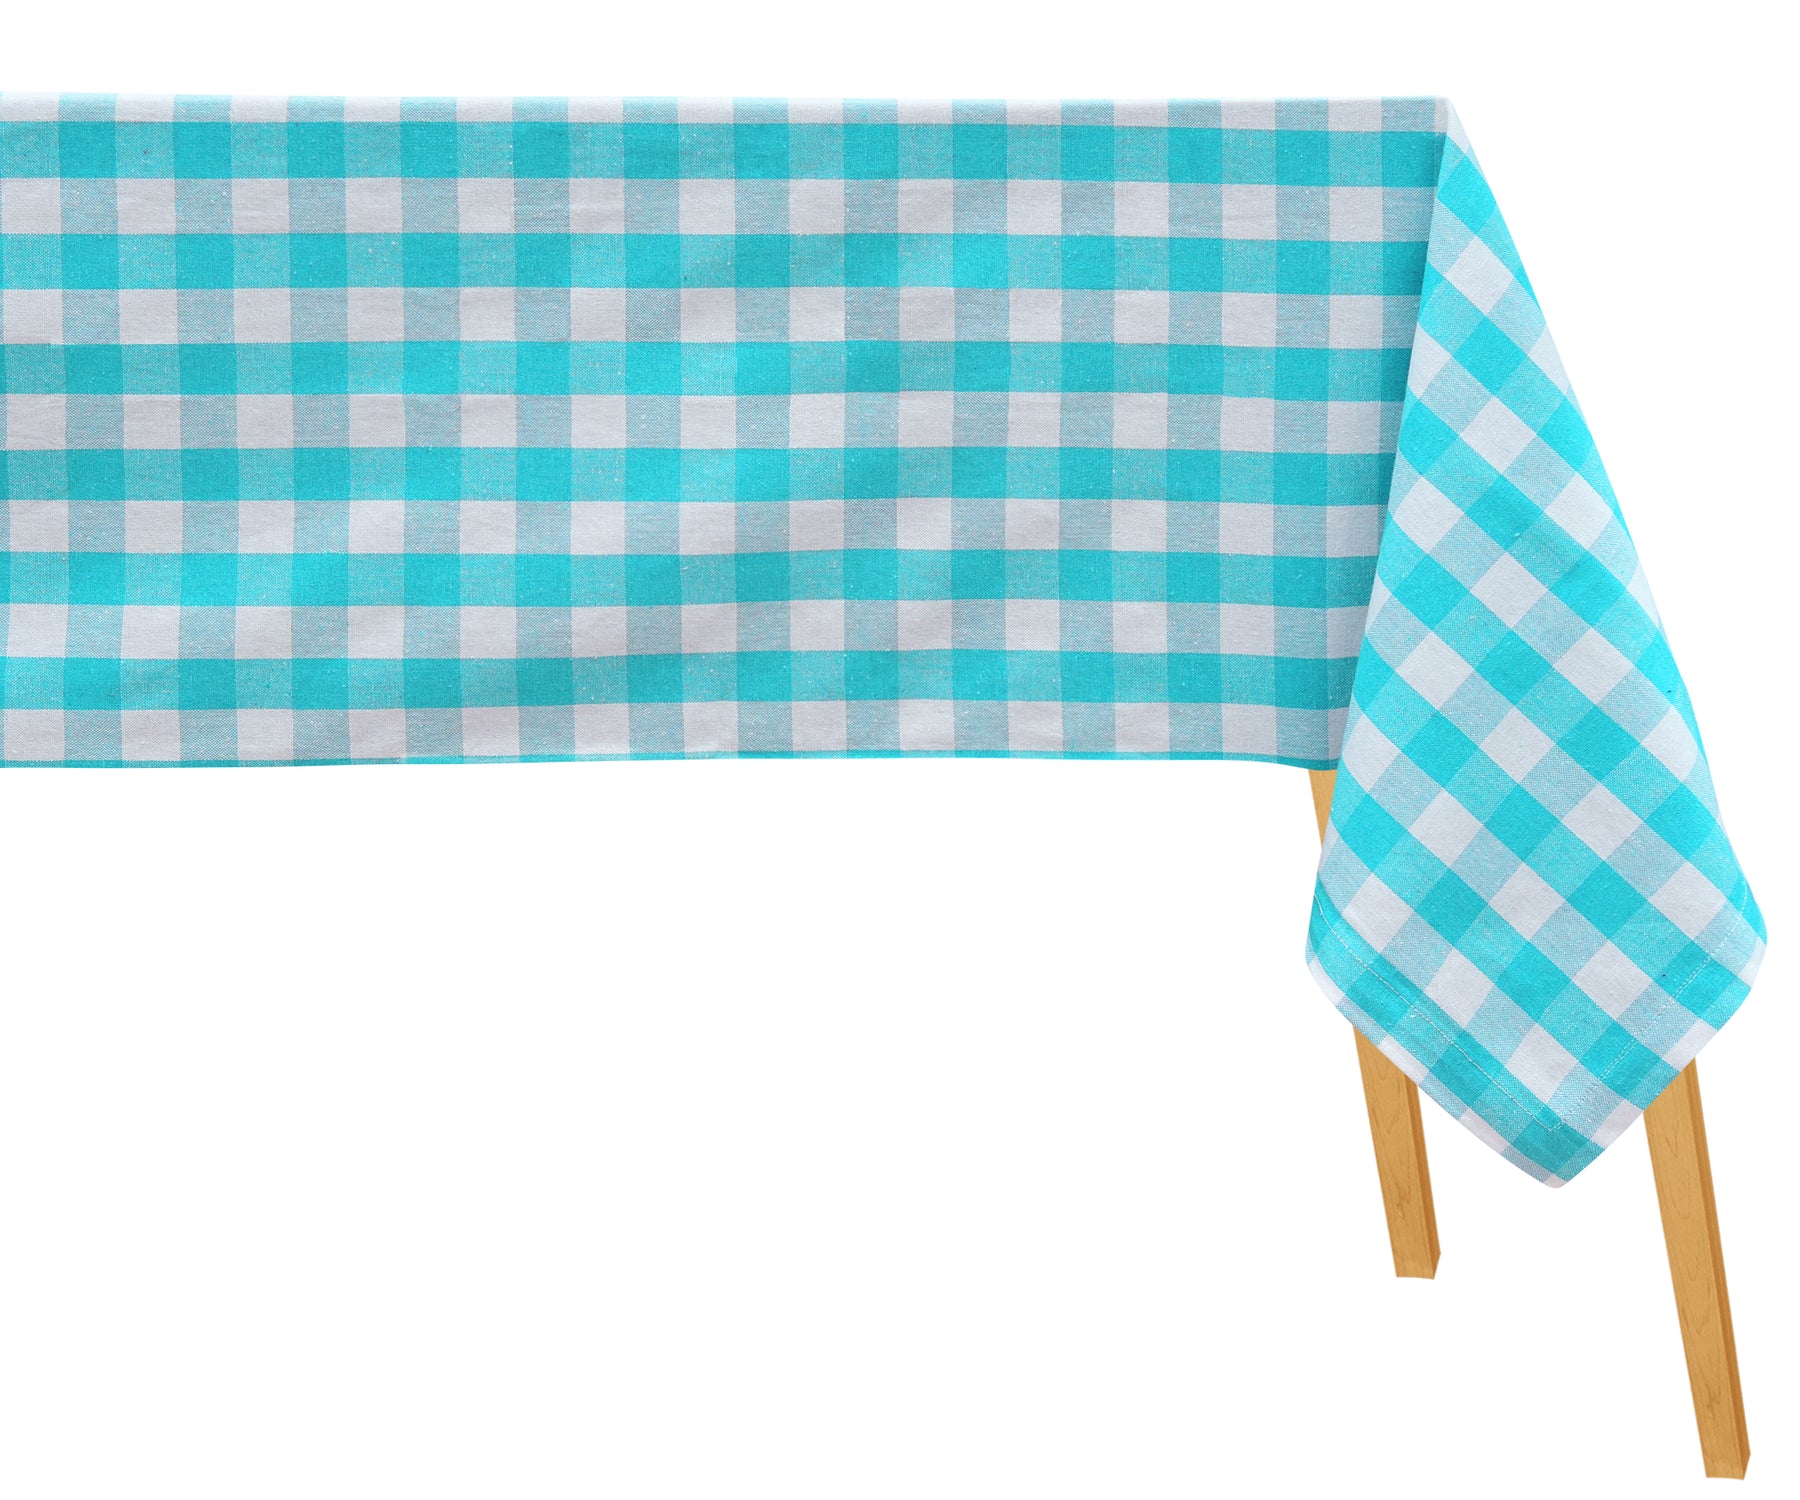 Classic gingham checkered plaid tablecloth, a must-have for farmhouse decor.